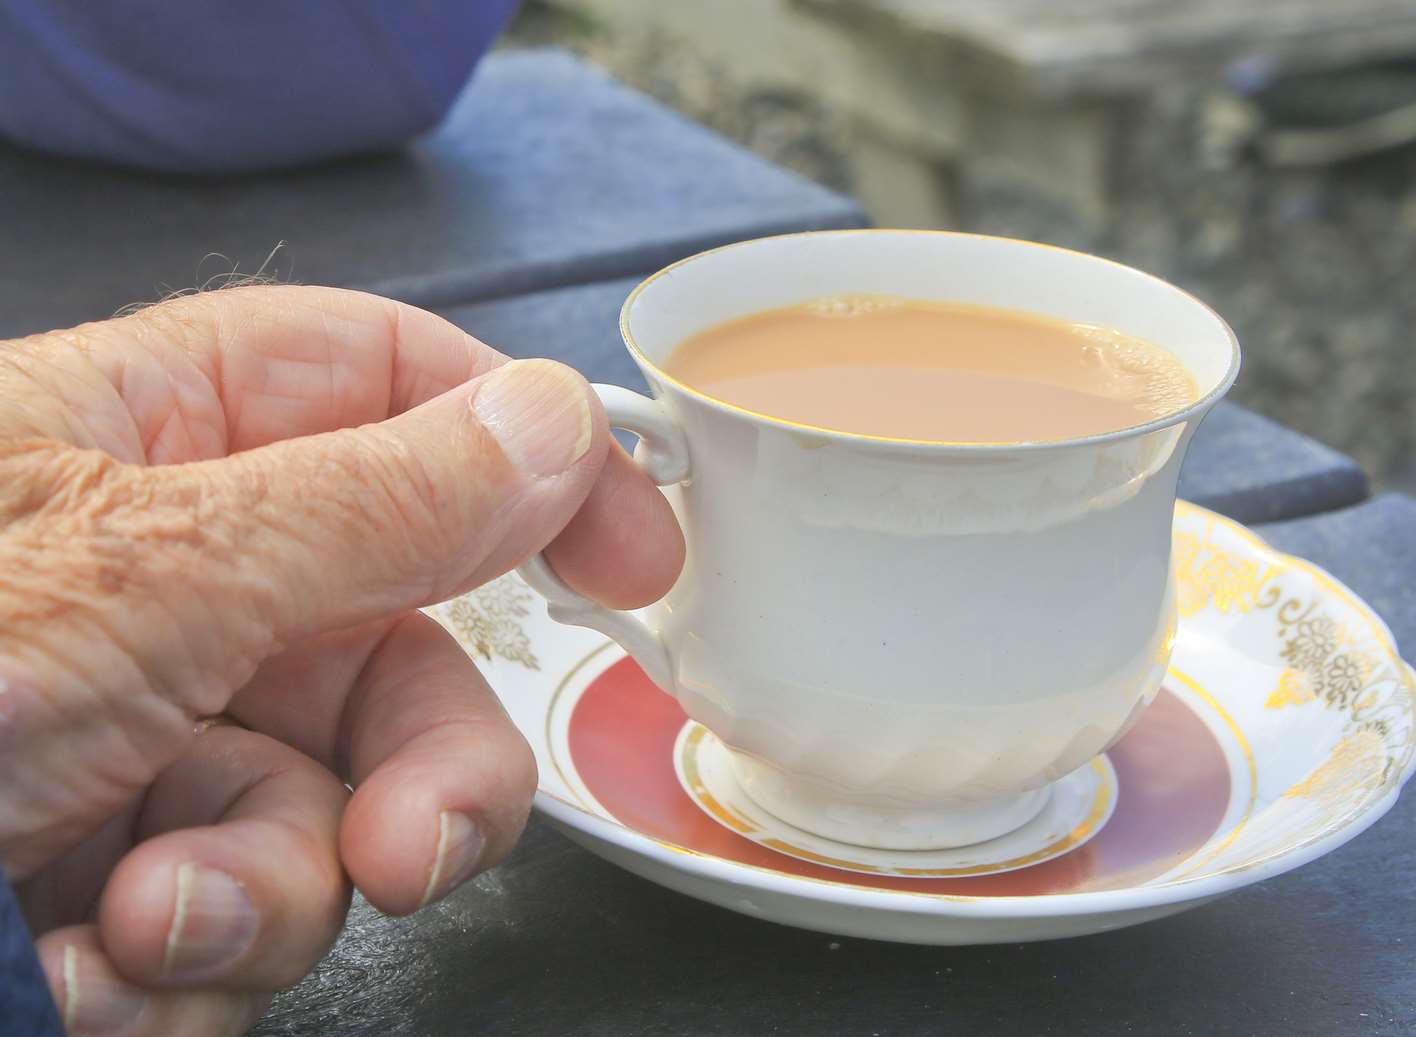 The pensioner threw the cup of tea. Library image.